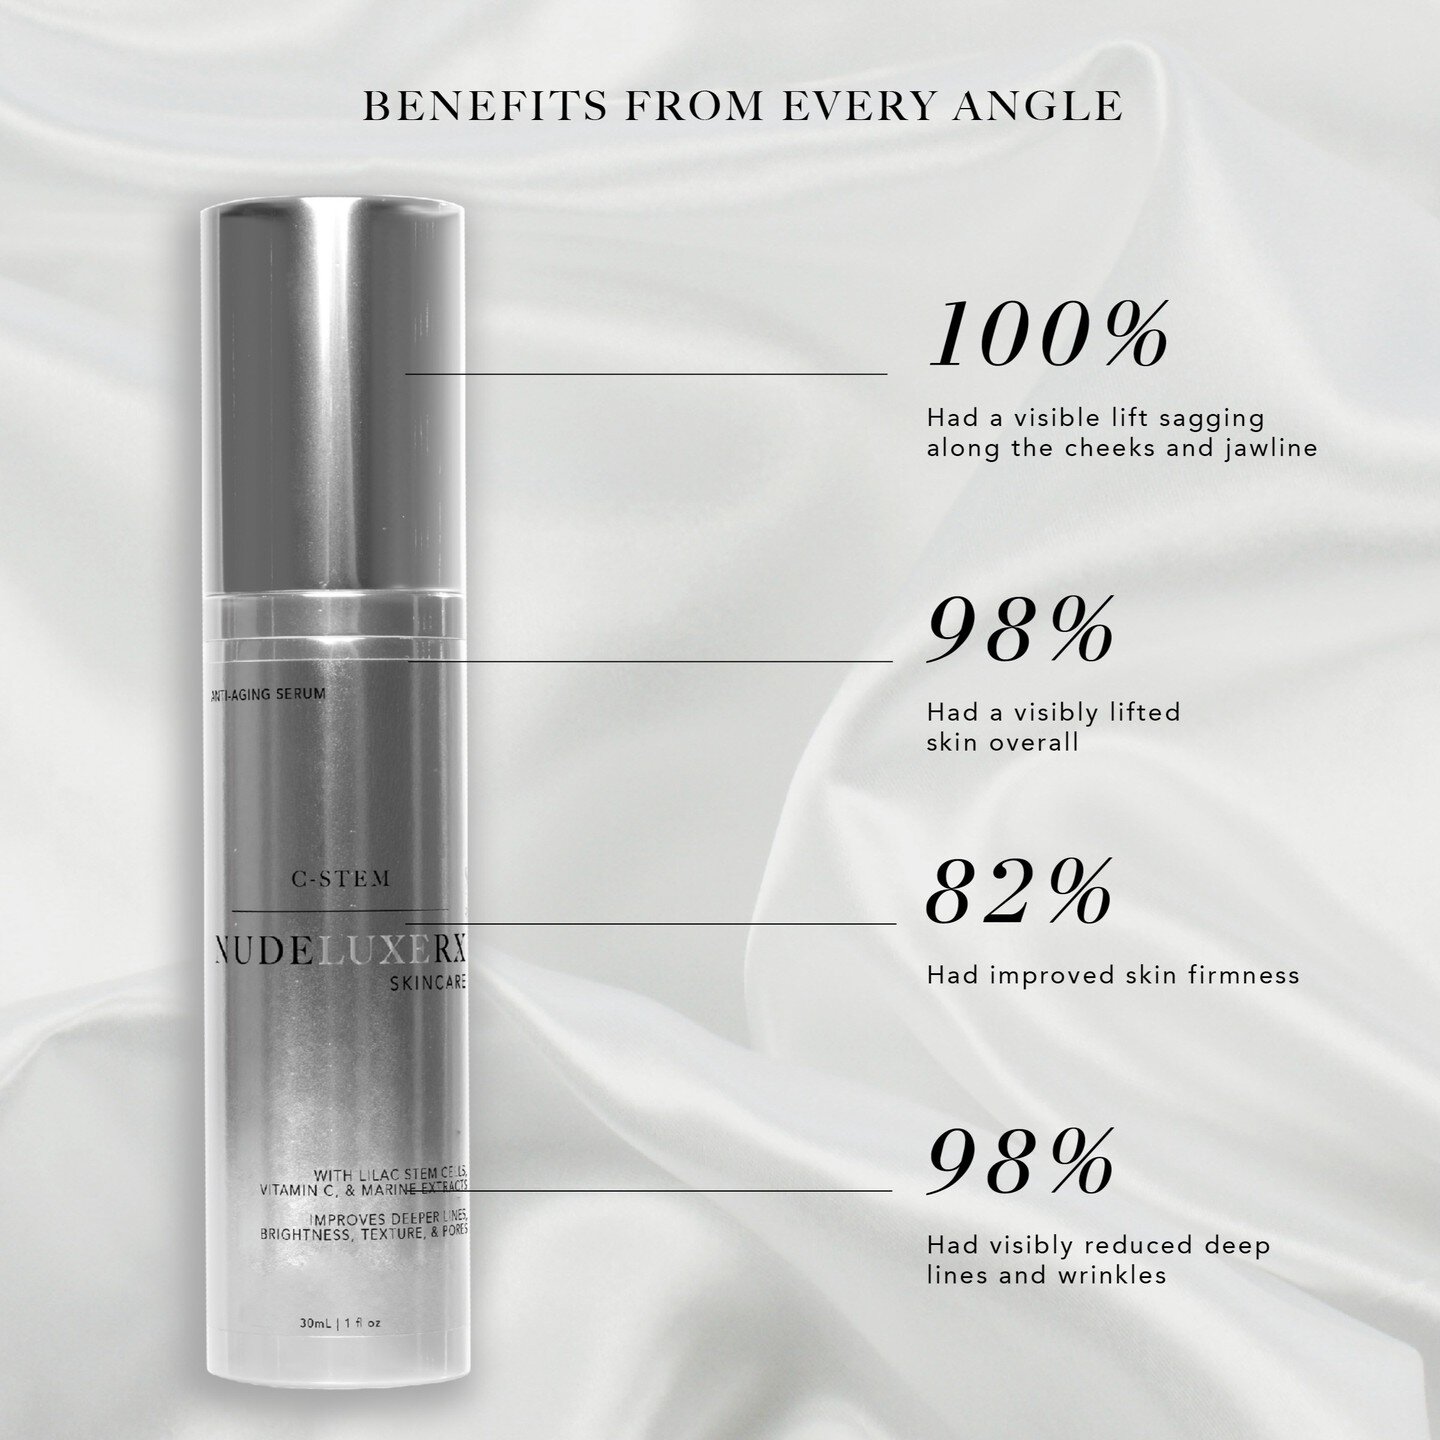 So many reasons to 🤍 our C-Stem
Serum!
◽ Dramatically brightens texture 
◽ Visibly reduces deep lines
◽ Lilac Stem Cells
◽ Vitamin C
◽ Marine Extracts